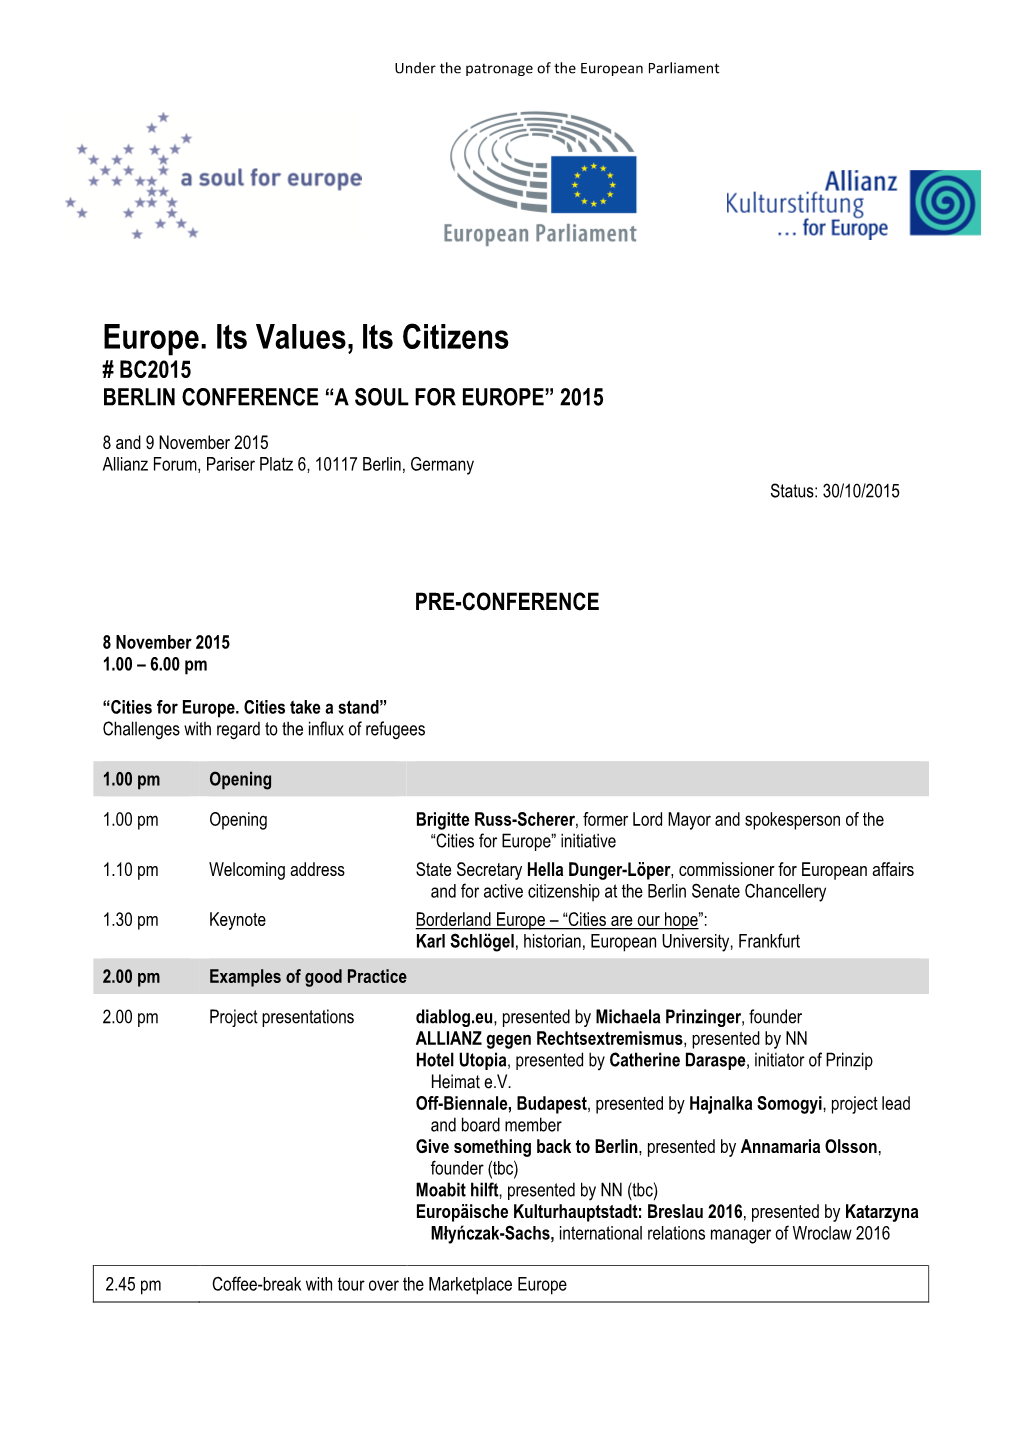 Europe. Its Values, Its Citizens # BC2015 BERLIN CONFERENCE “A SOUL for EUROPE” 2015